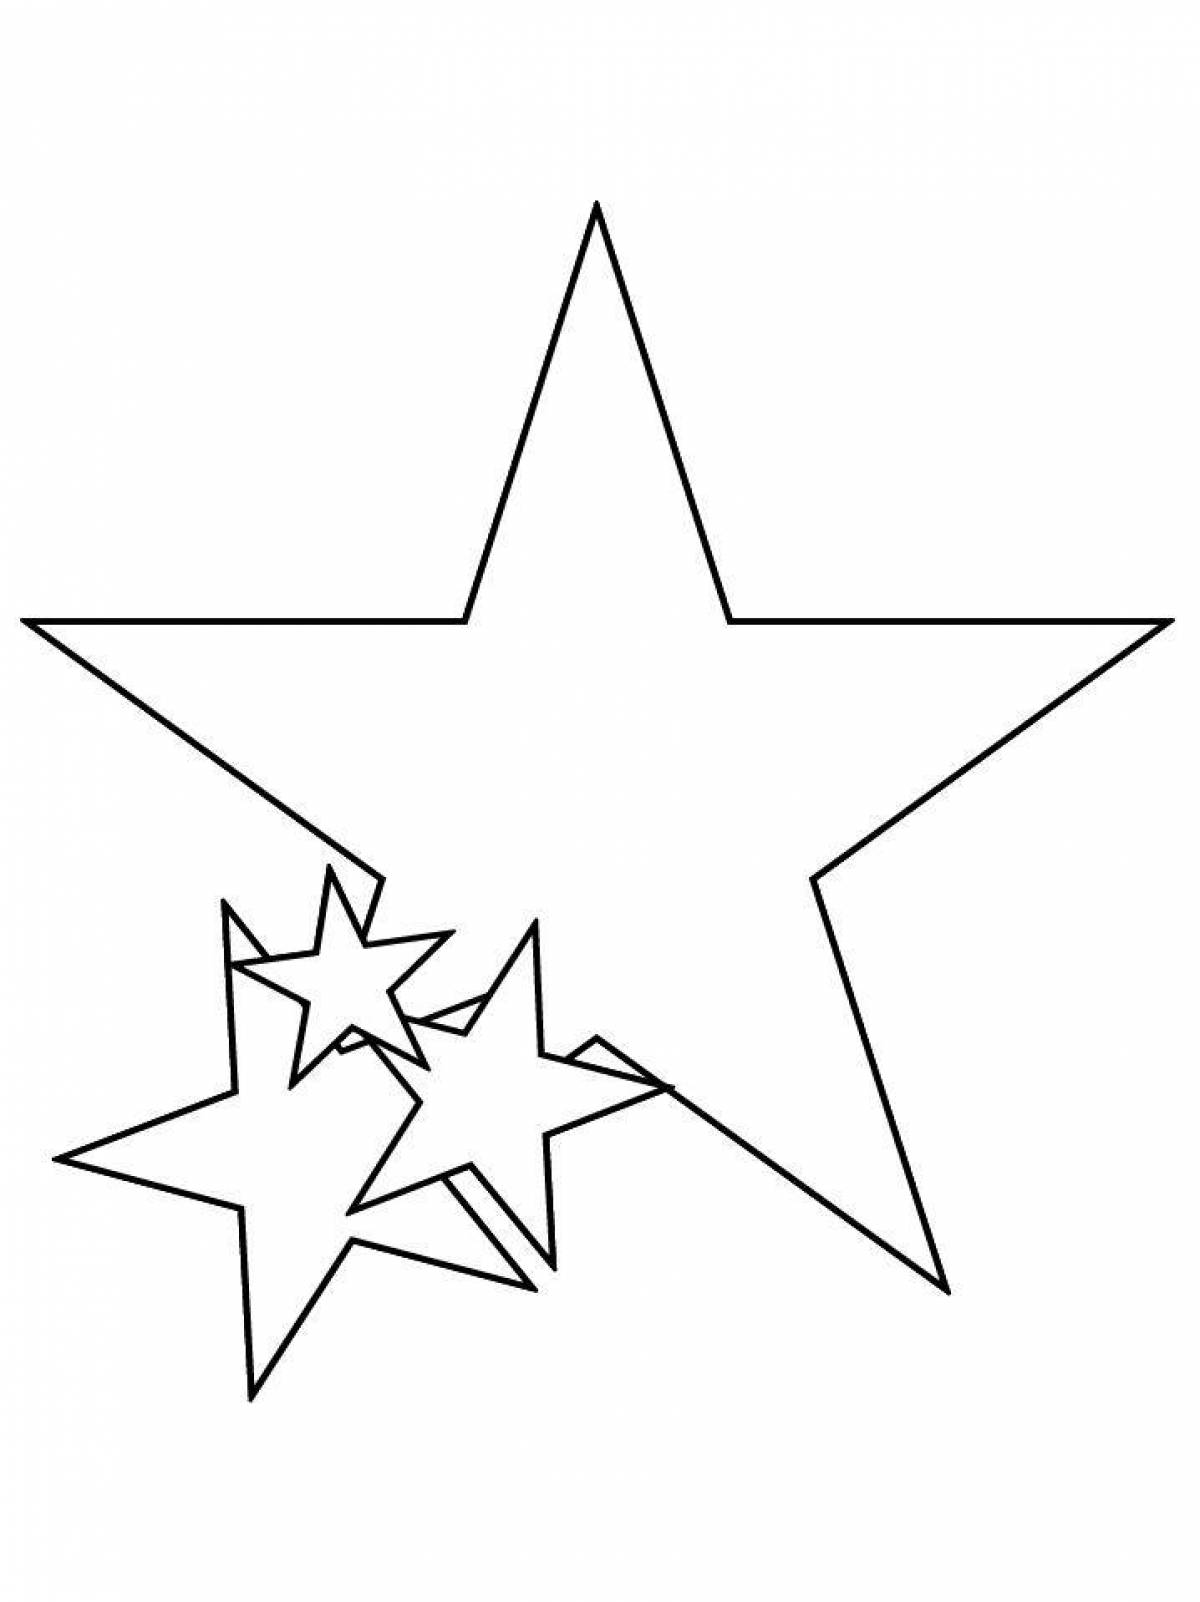 Coloring book shining military star